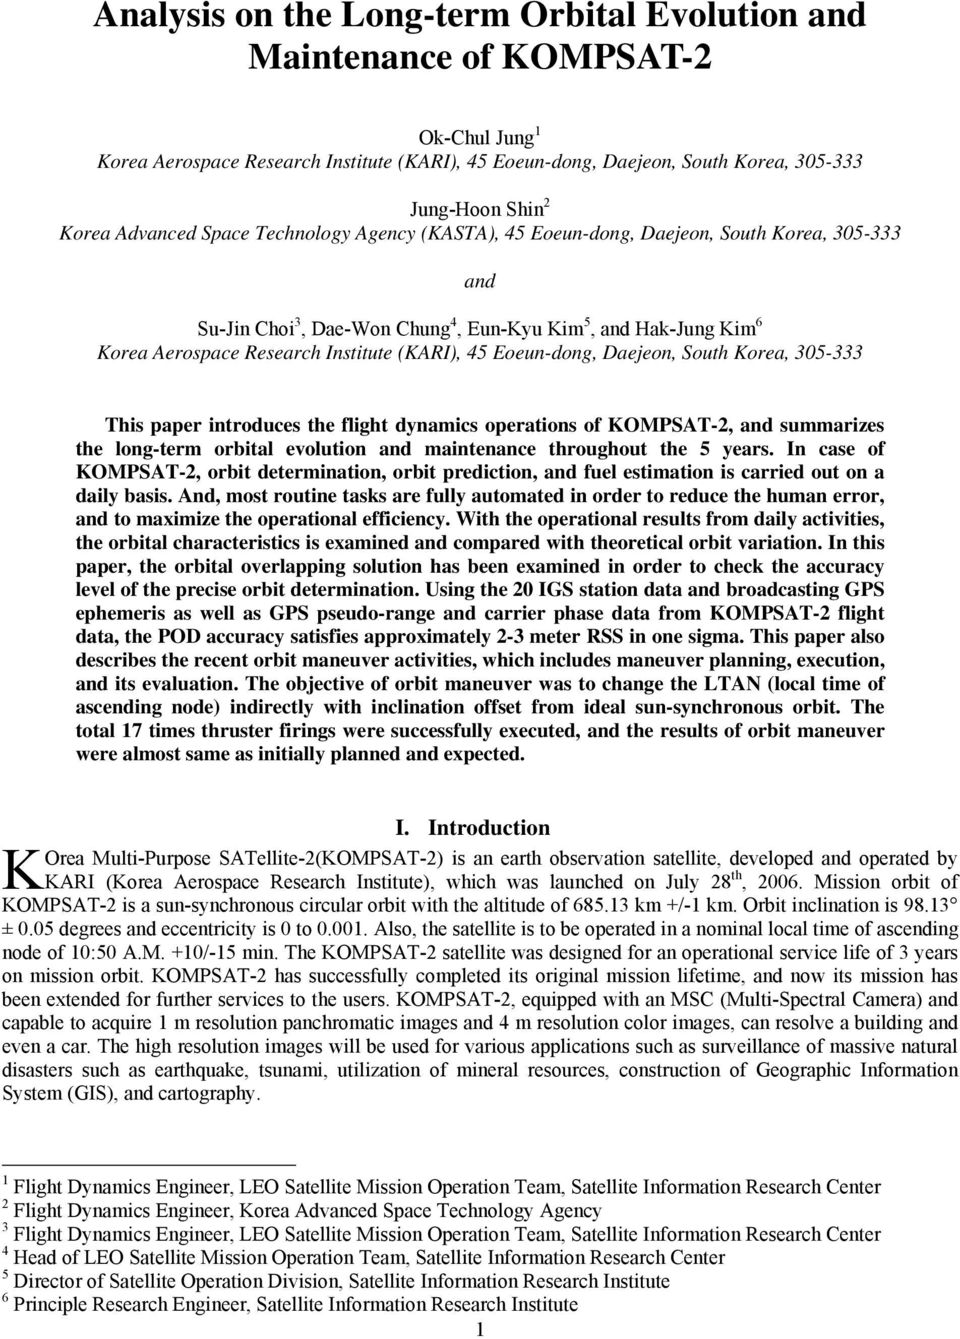 45 Eoeun-dong, Daejeon, South Korea, 305-333 This paper introduces the flight dynamics operations of KOMPSAT-2, and summarizes the long-term orbital evolution and maintenance throughout the 5 years.